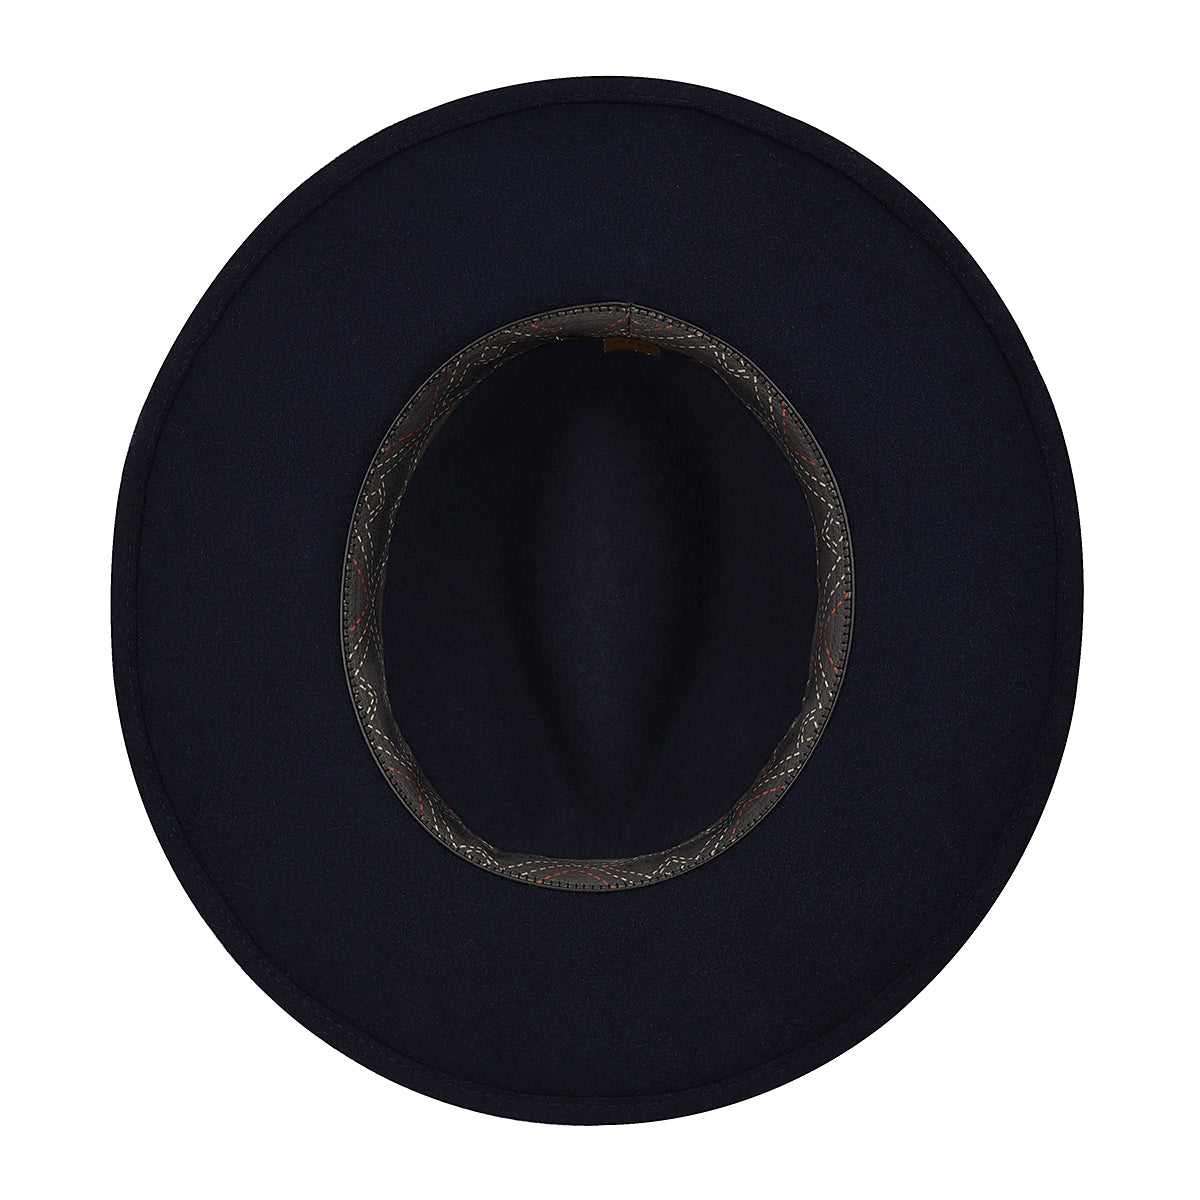 Cuadra blue hat with fabric belt and feathers